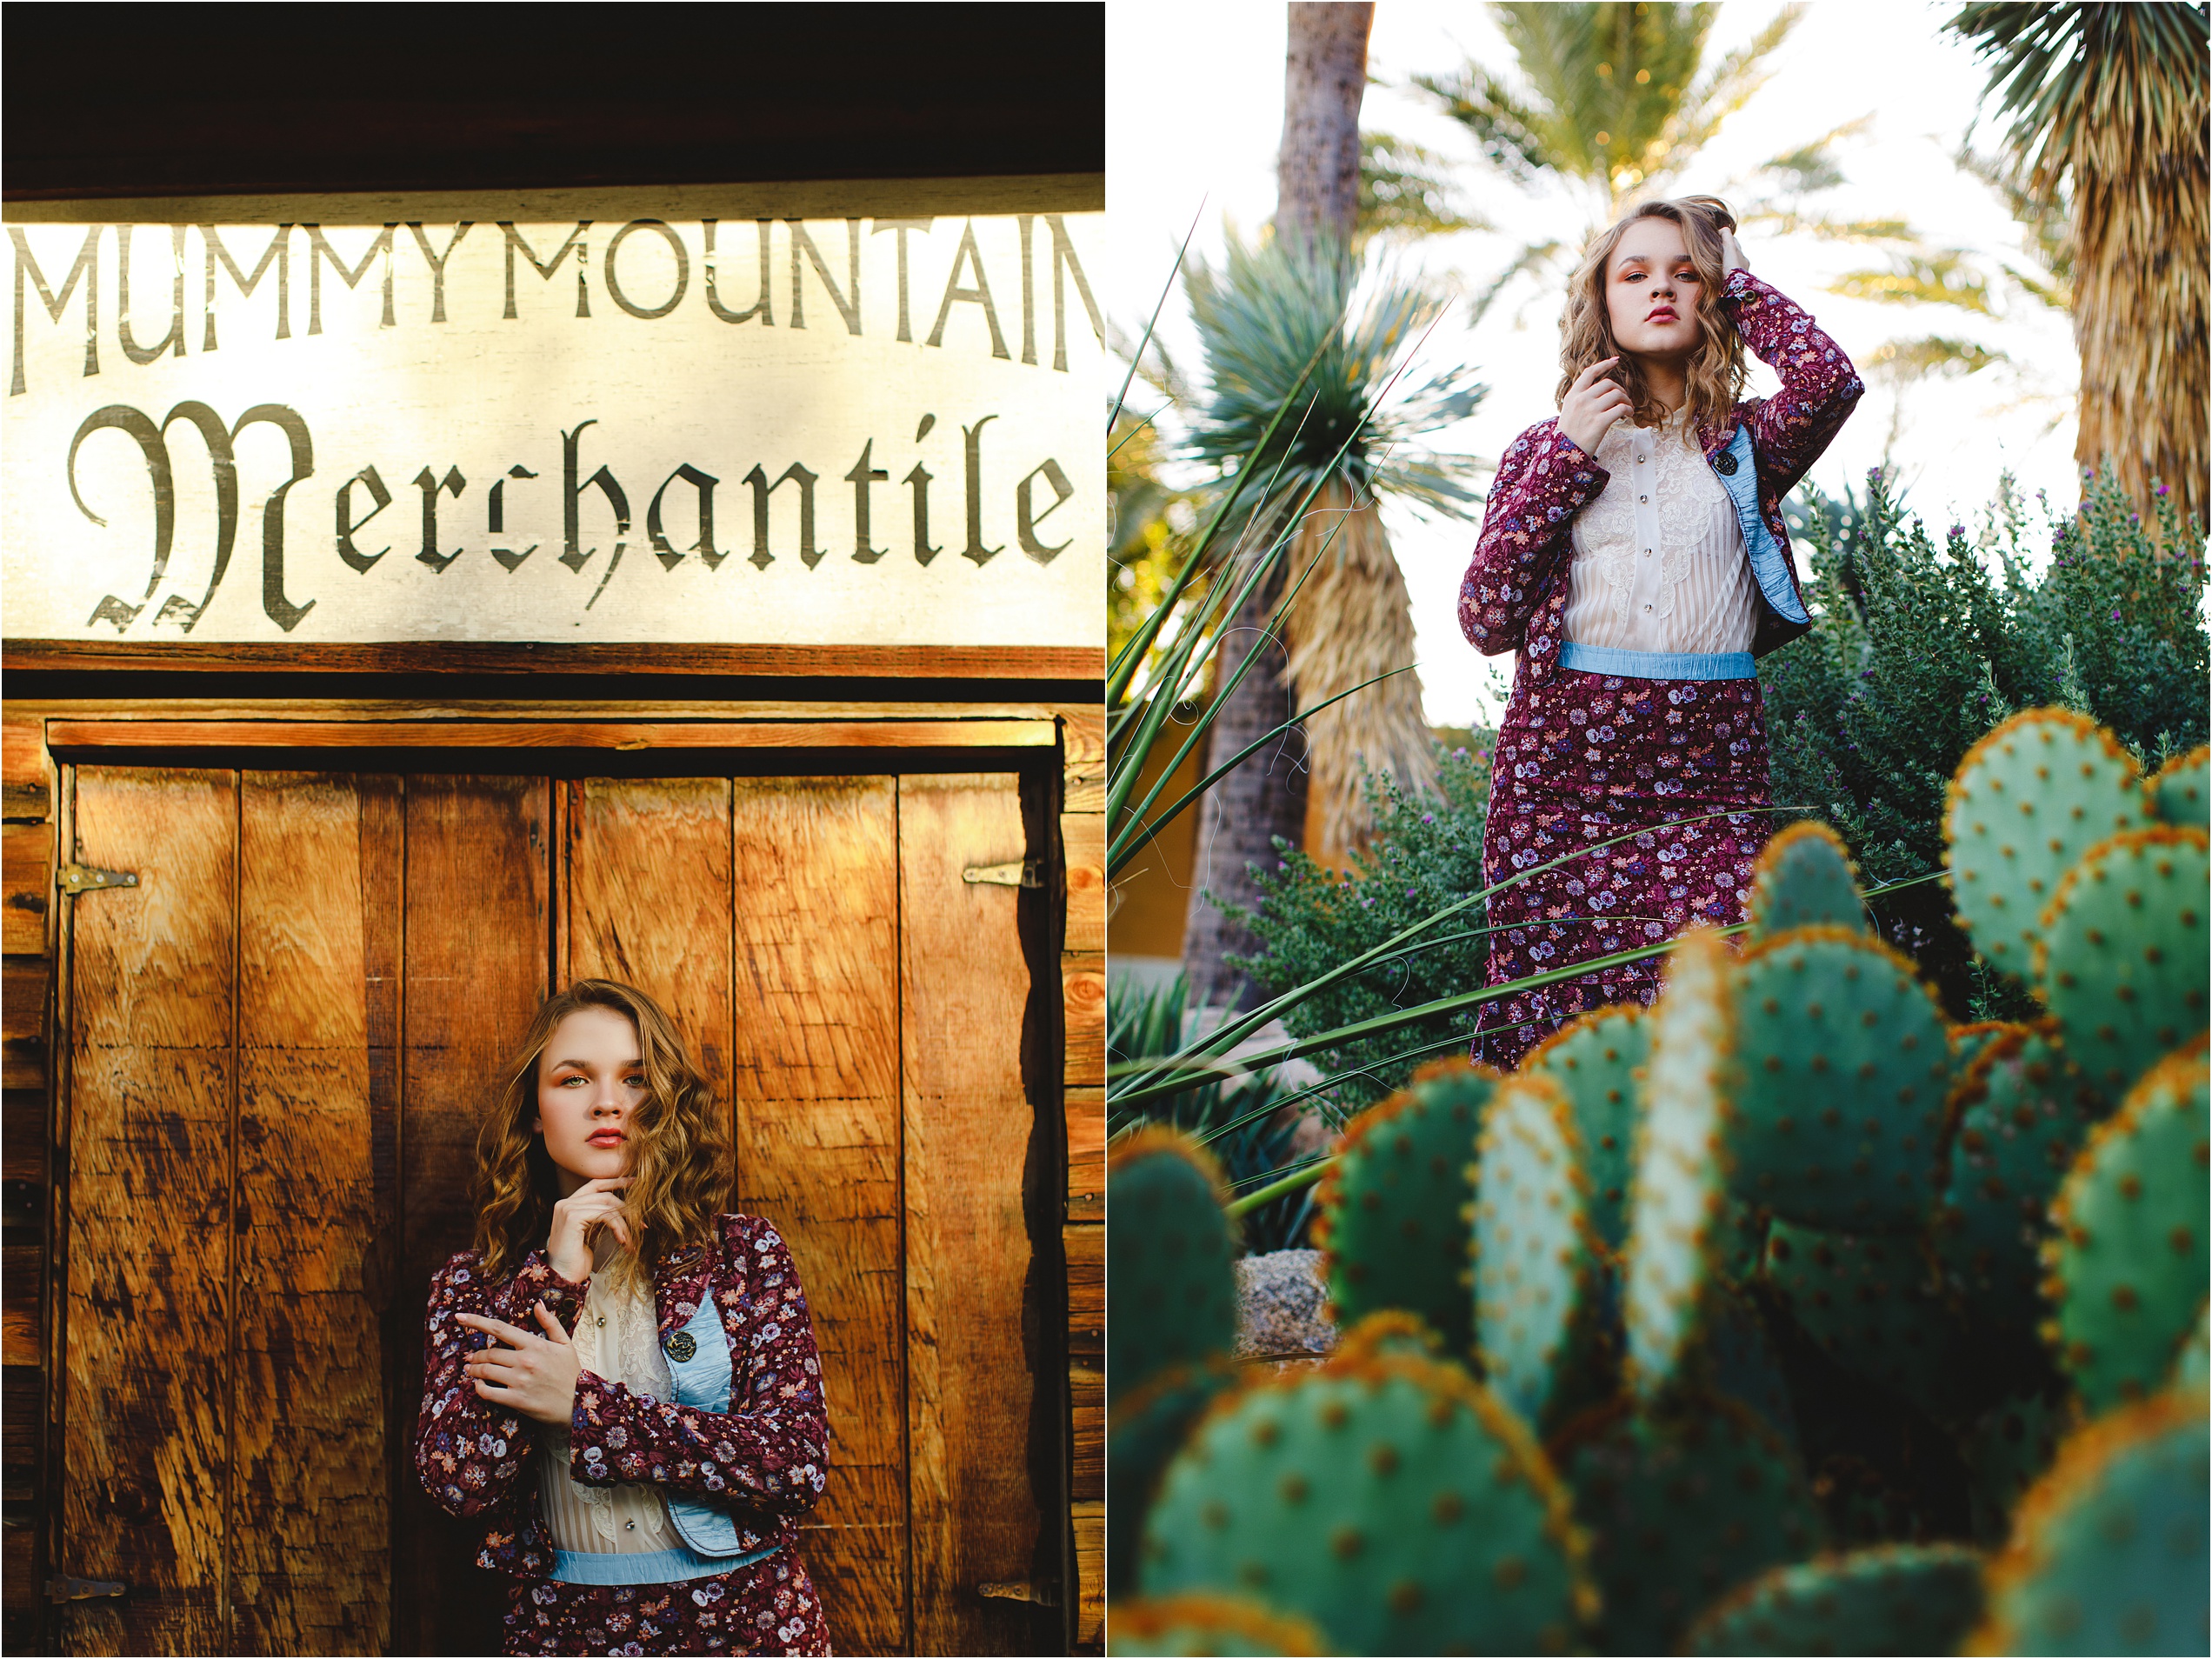 Abby posing in a two piece skirt and jacket floral set from Free People at an old western location and cacti with Slice of Lime Senior Photography.